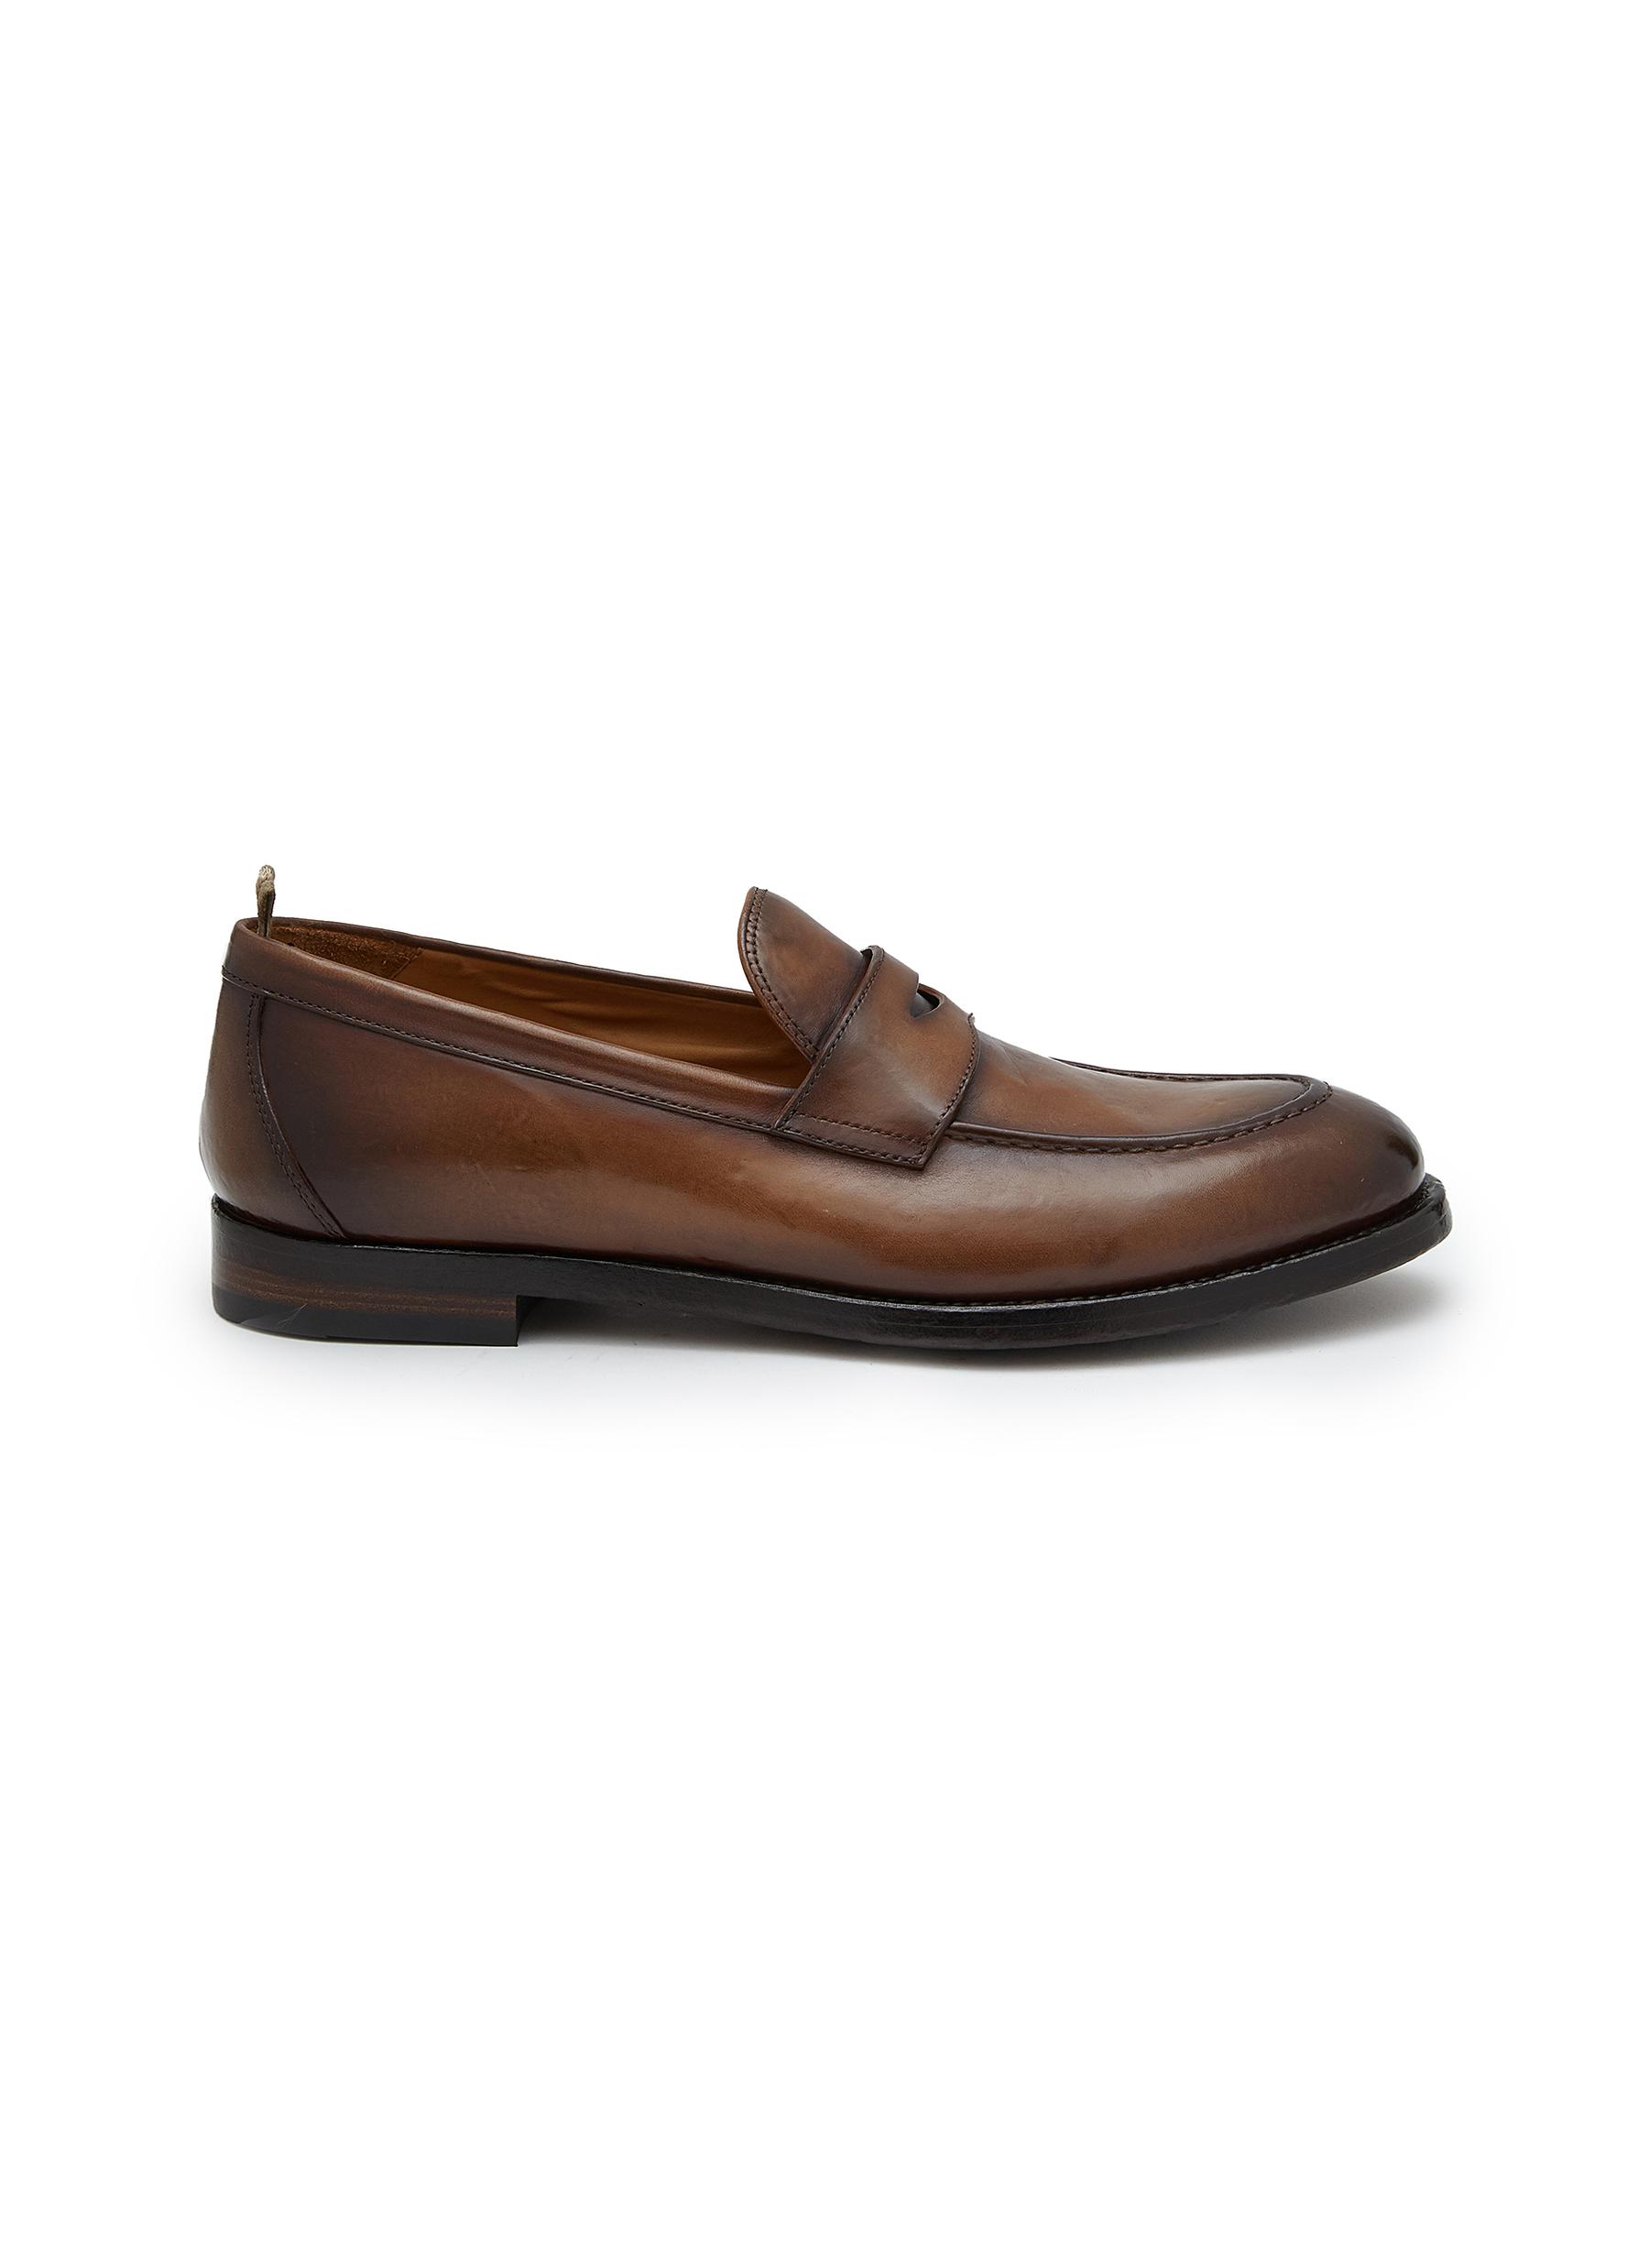 Tulane 002 Leather Penny Loafers